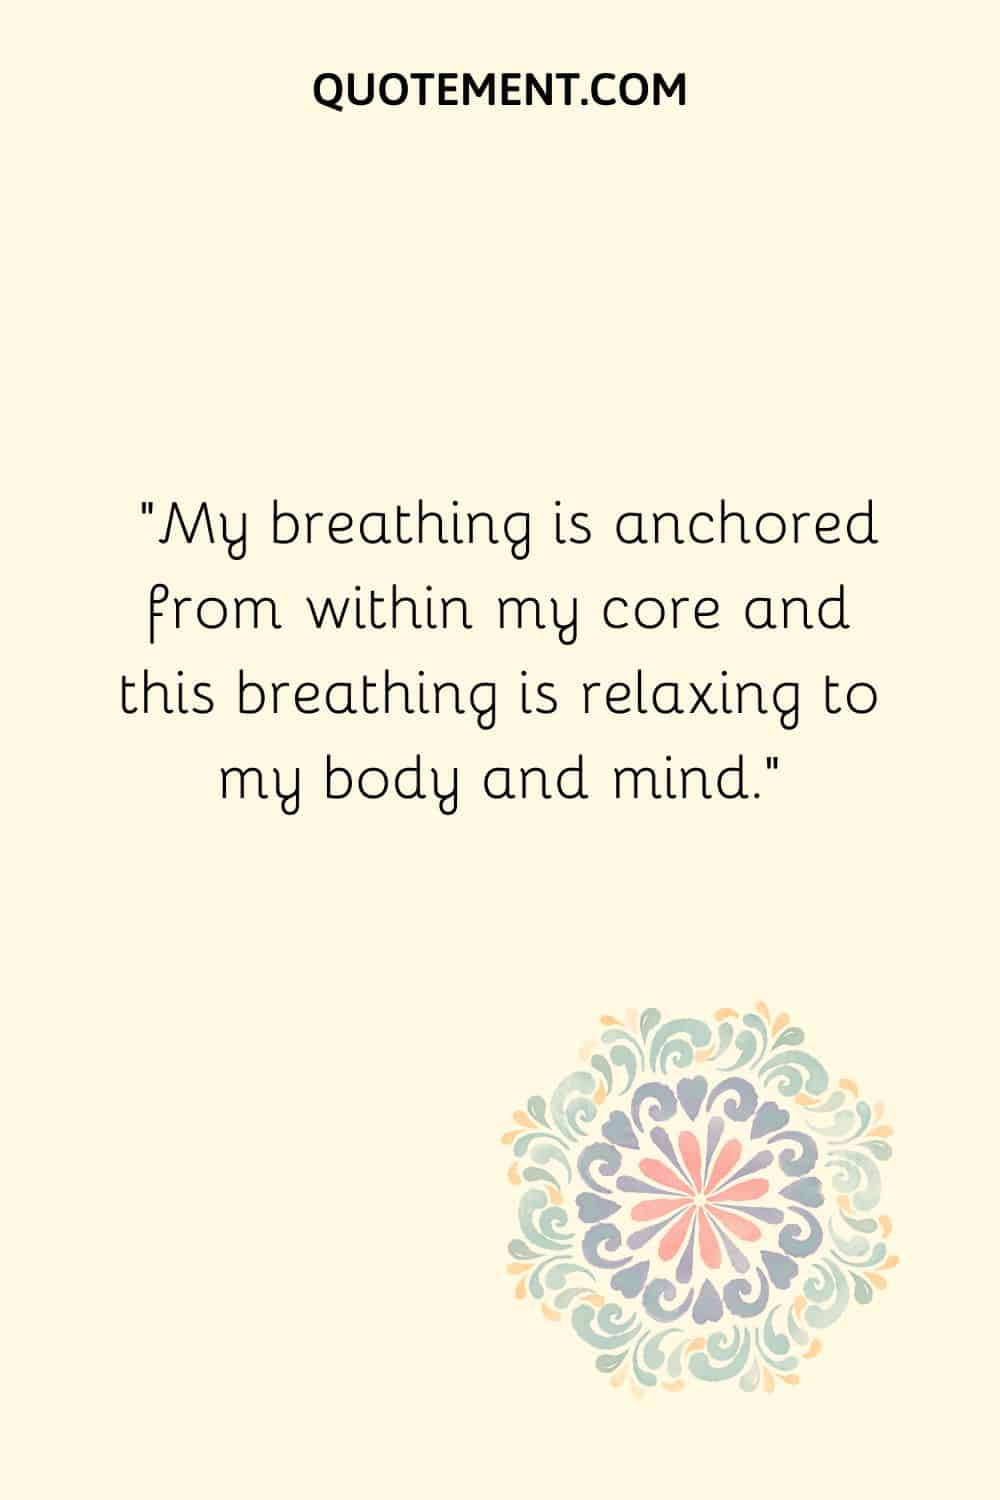 My breathing is anchored from within my core and this breathing is relaxing to my body and mind